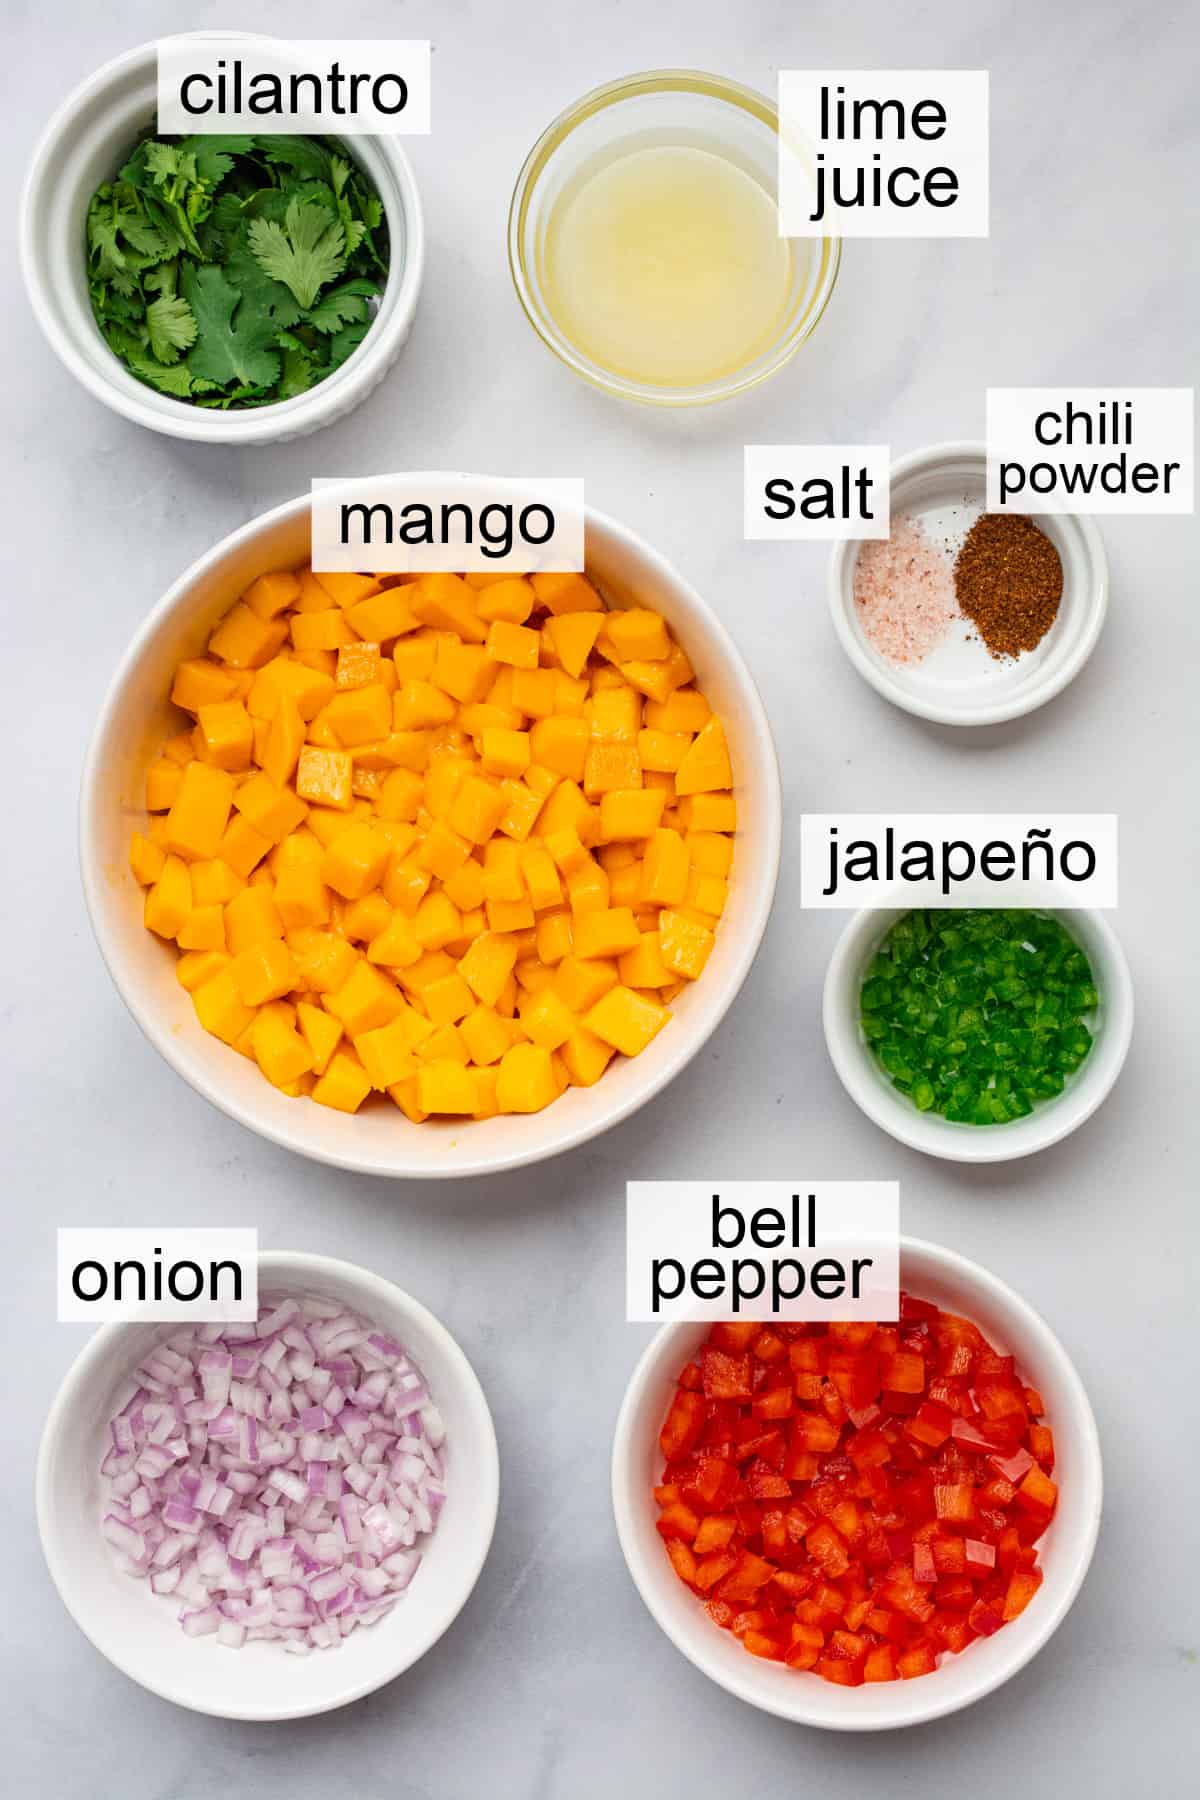 A labeled image of 6 white bowls varying in size with an ingredient in each-mango, jalapeño, bell pepper, onion, cilantro, lime juice, salt and chili powder.